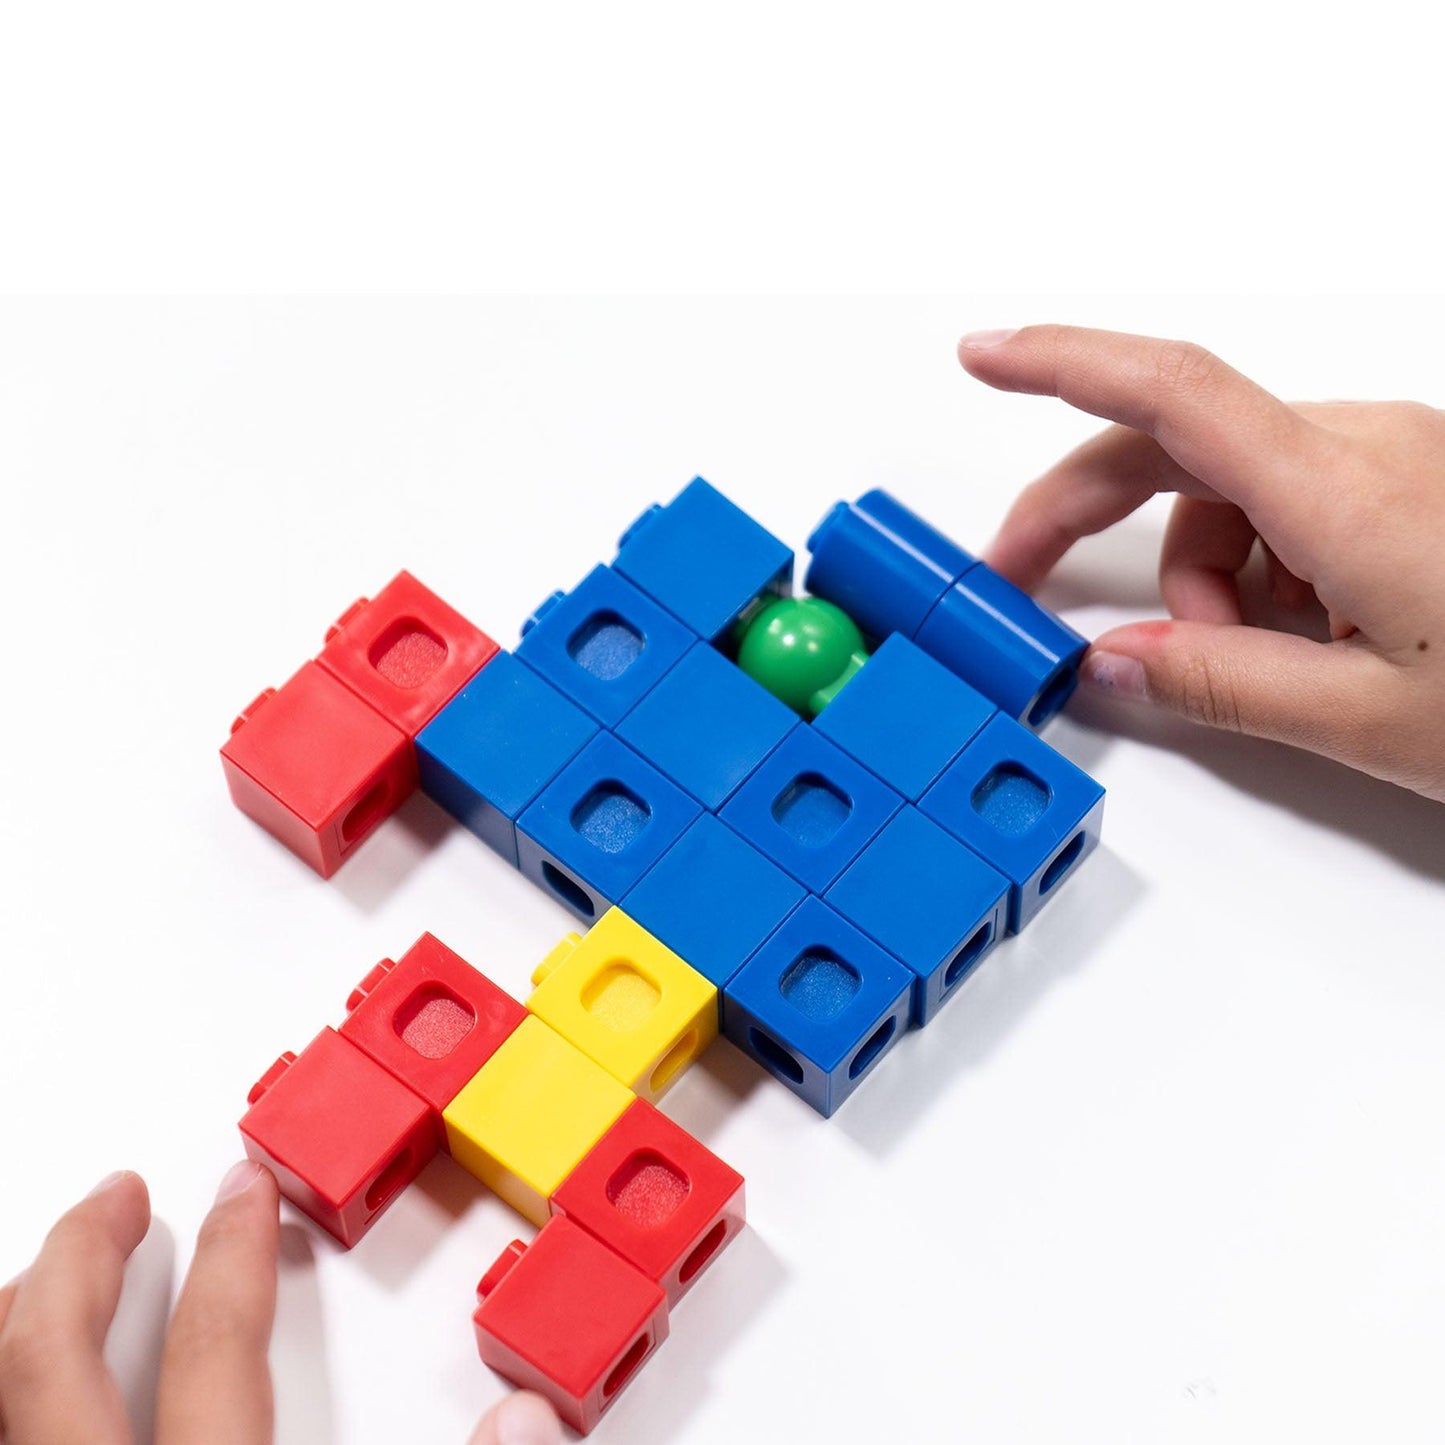 Mathcubes - Sorting and Patterns - Loomini